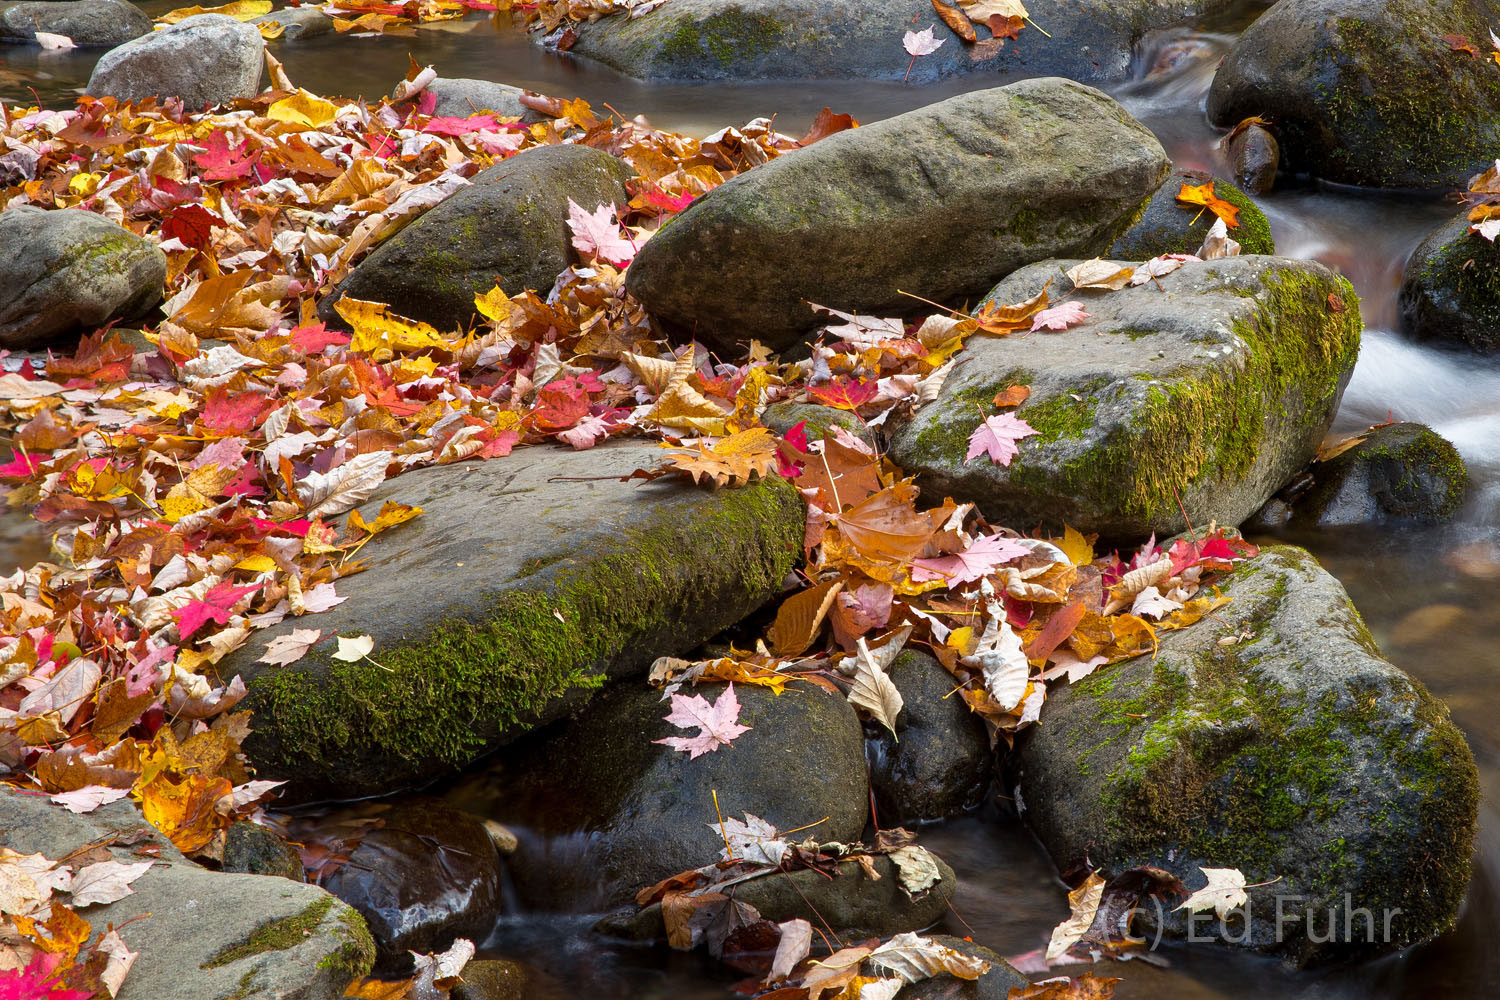 Fall is passing and leaves gather around the boulders of this mountain stream.